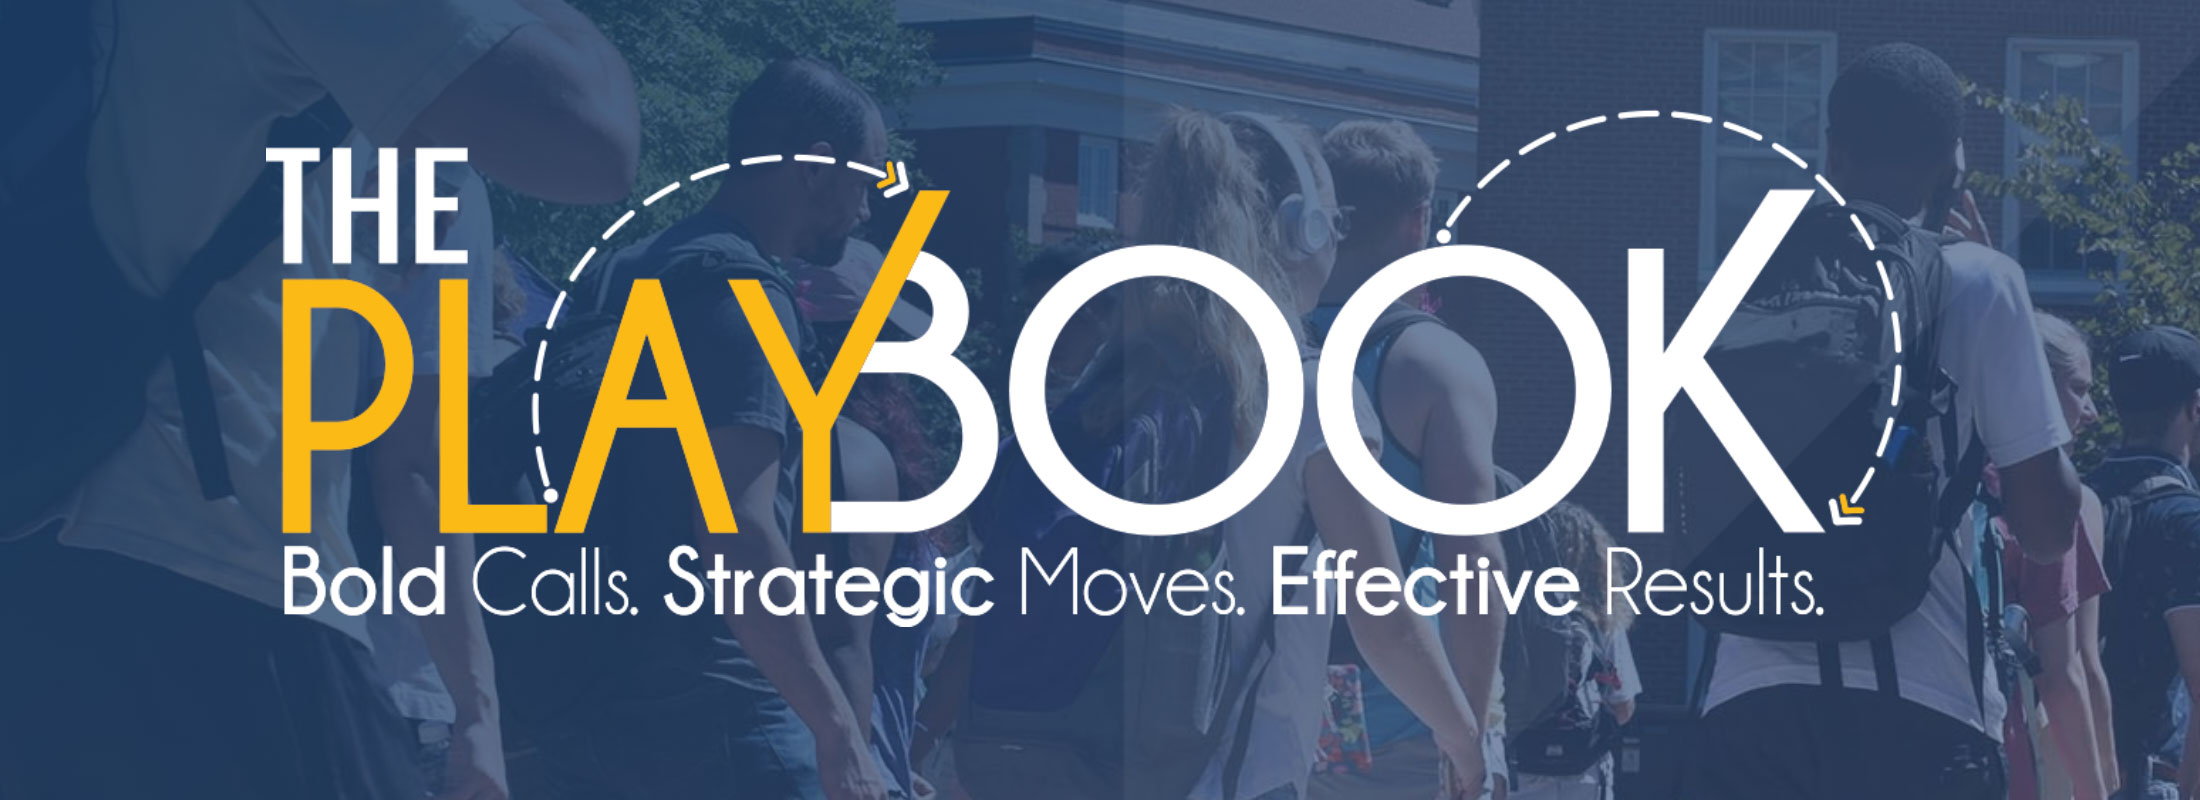 The Playbook | Bold Calls. Strategic Moves. Effective Results.